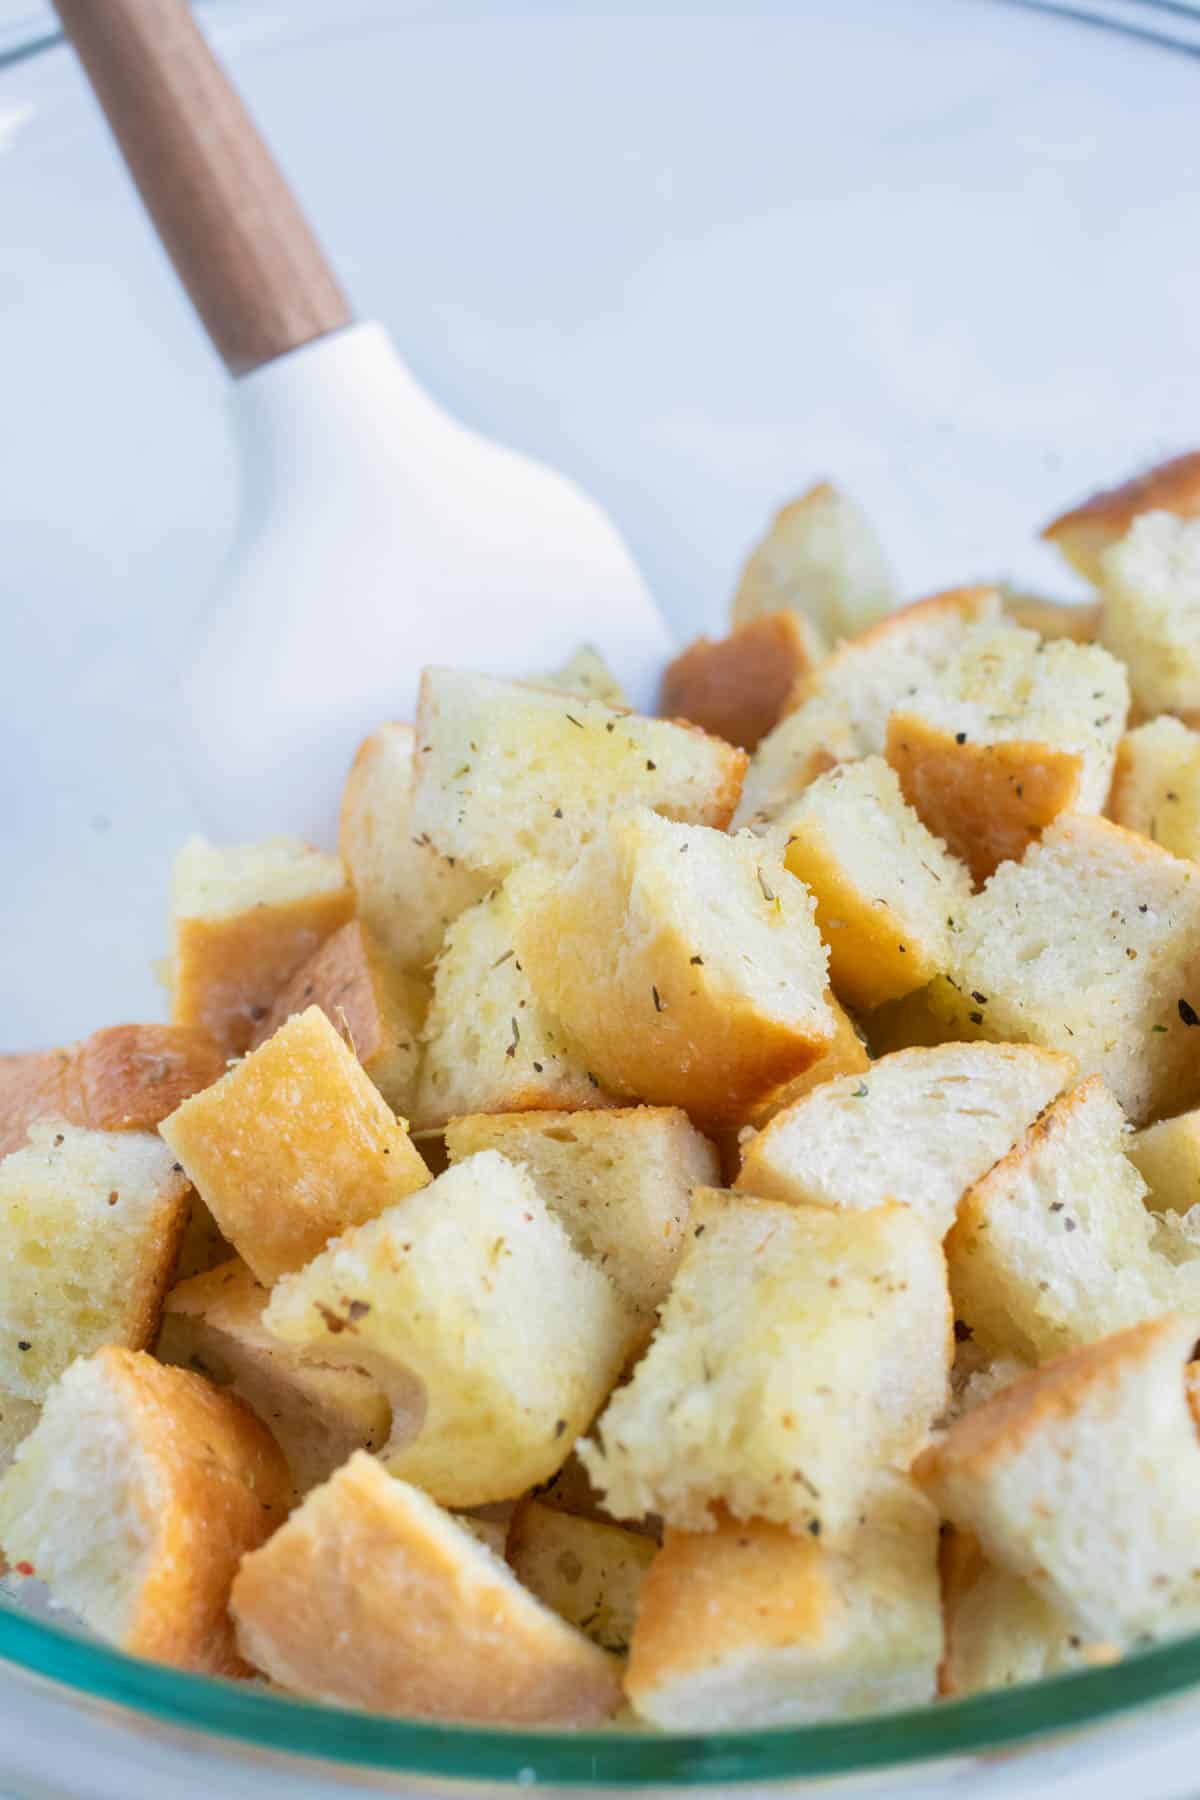 Bread cubes are mixed with oil and seasonings.